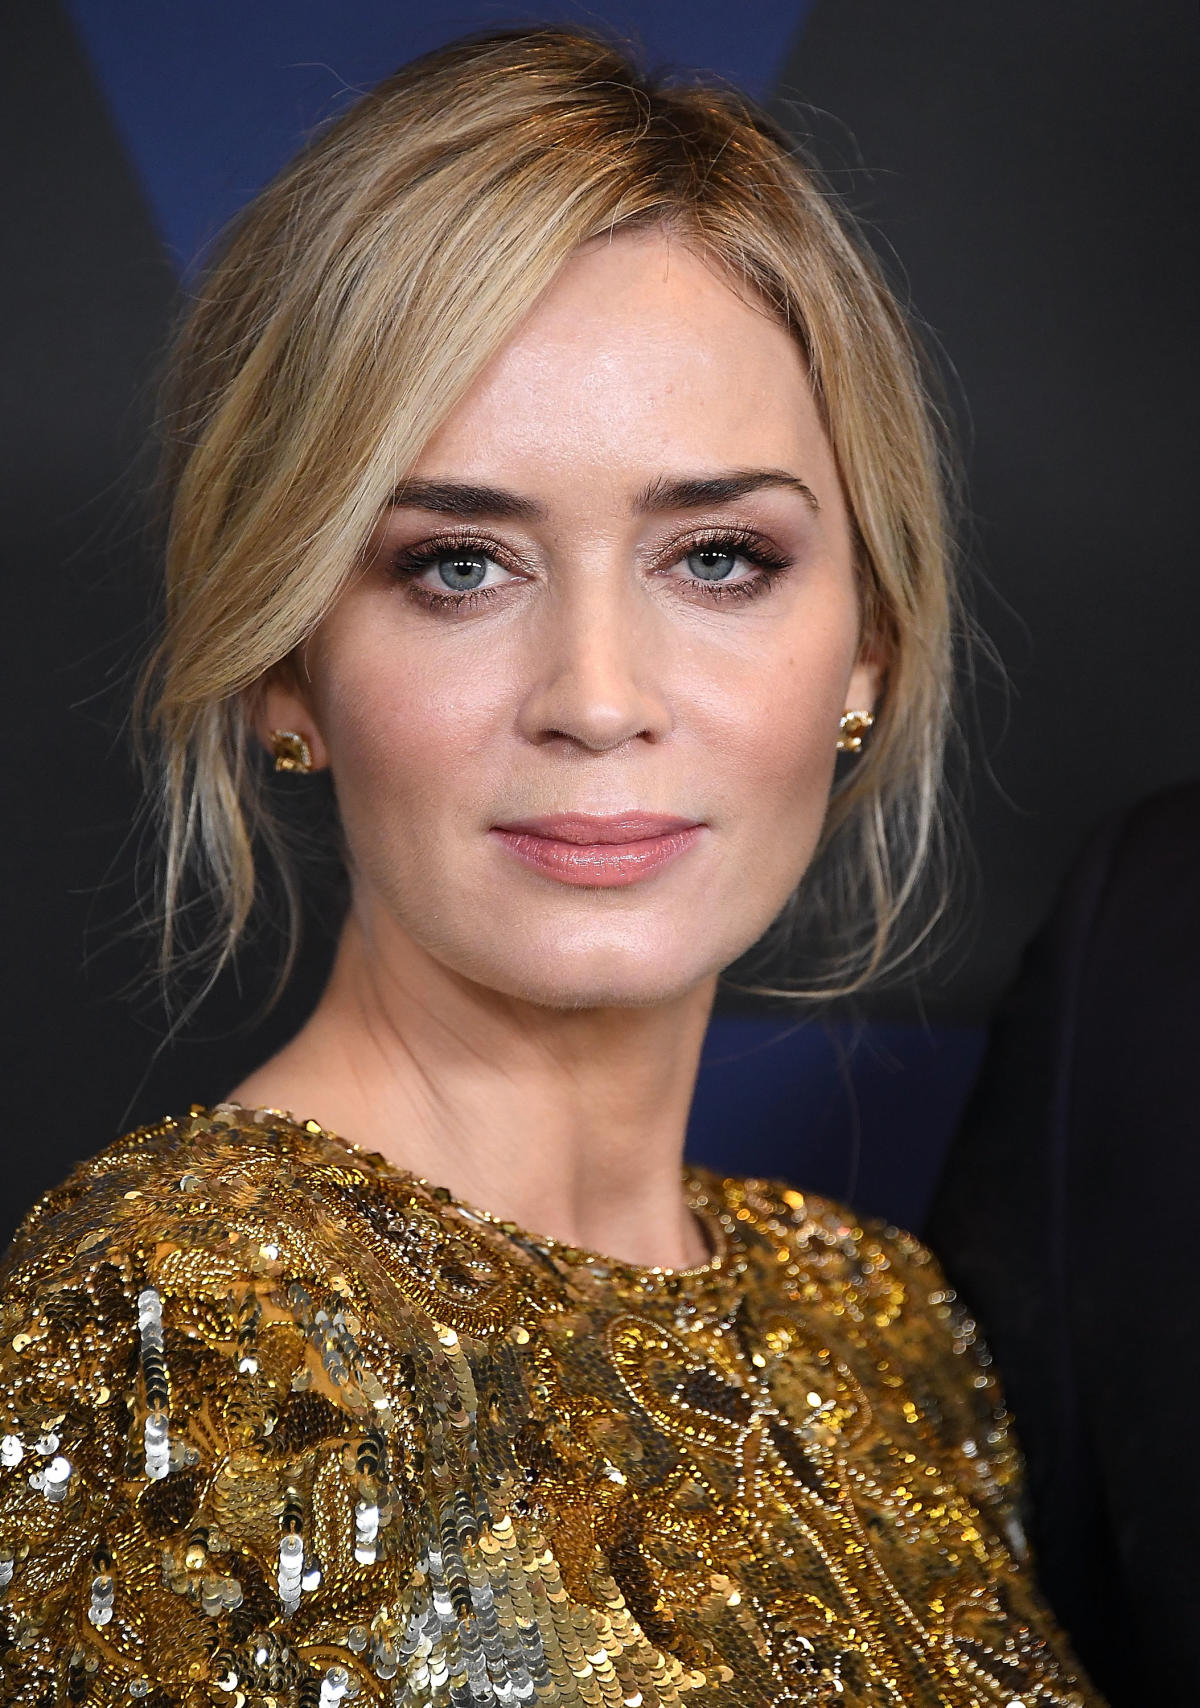 Emily Blunt Wore a Bedazzled Crop Top to an Awards Gala